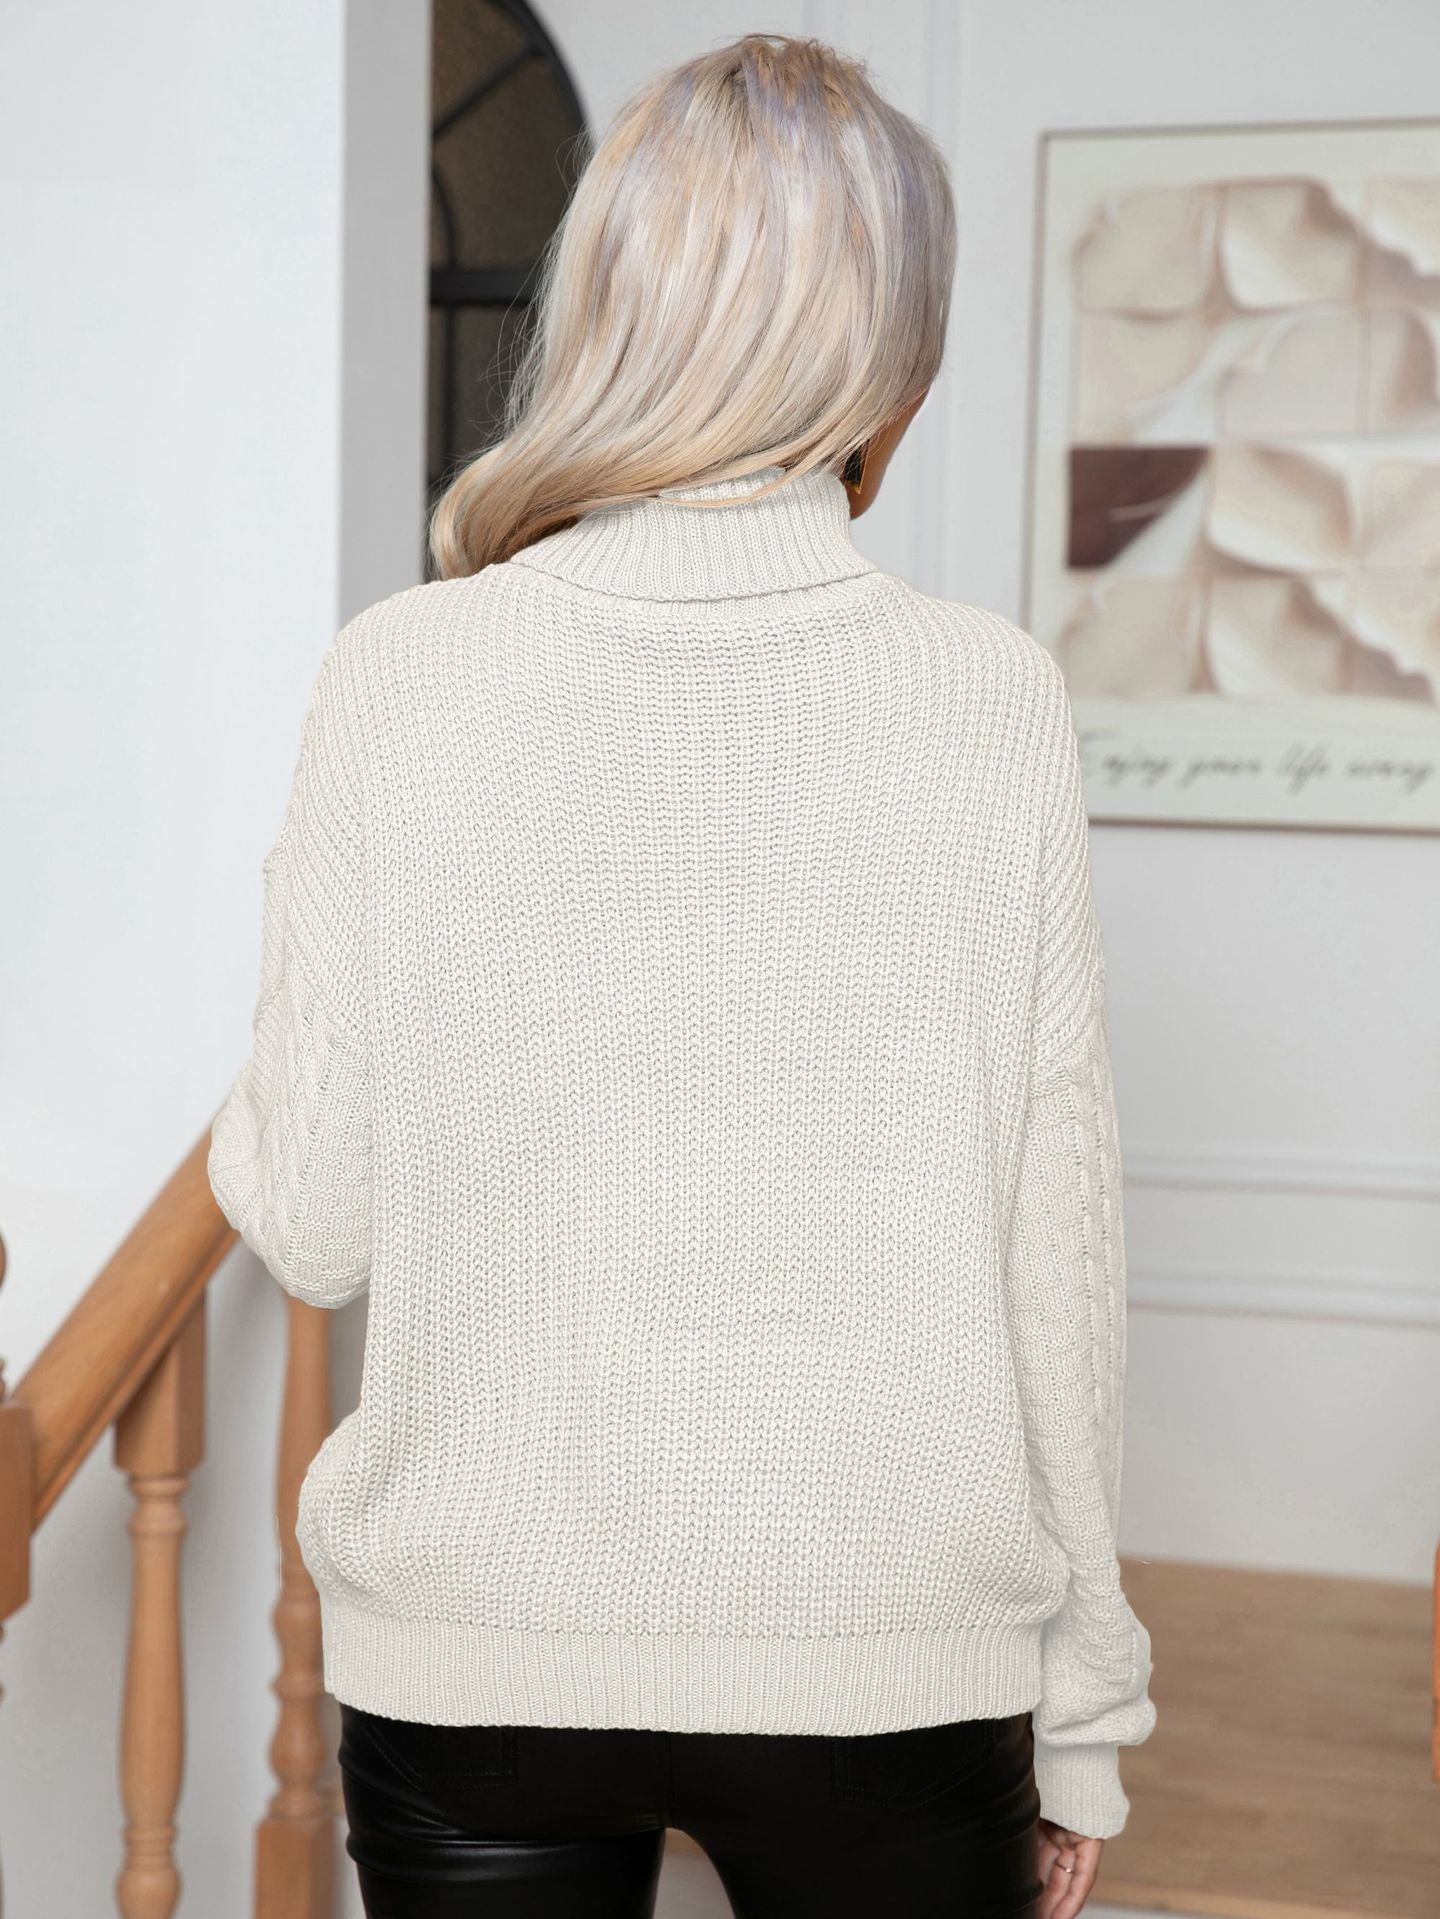 Cable-knit Turtleneck Loose-fitting Long Sleeve Sweater | Nowena